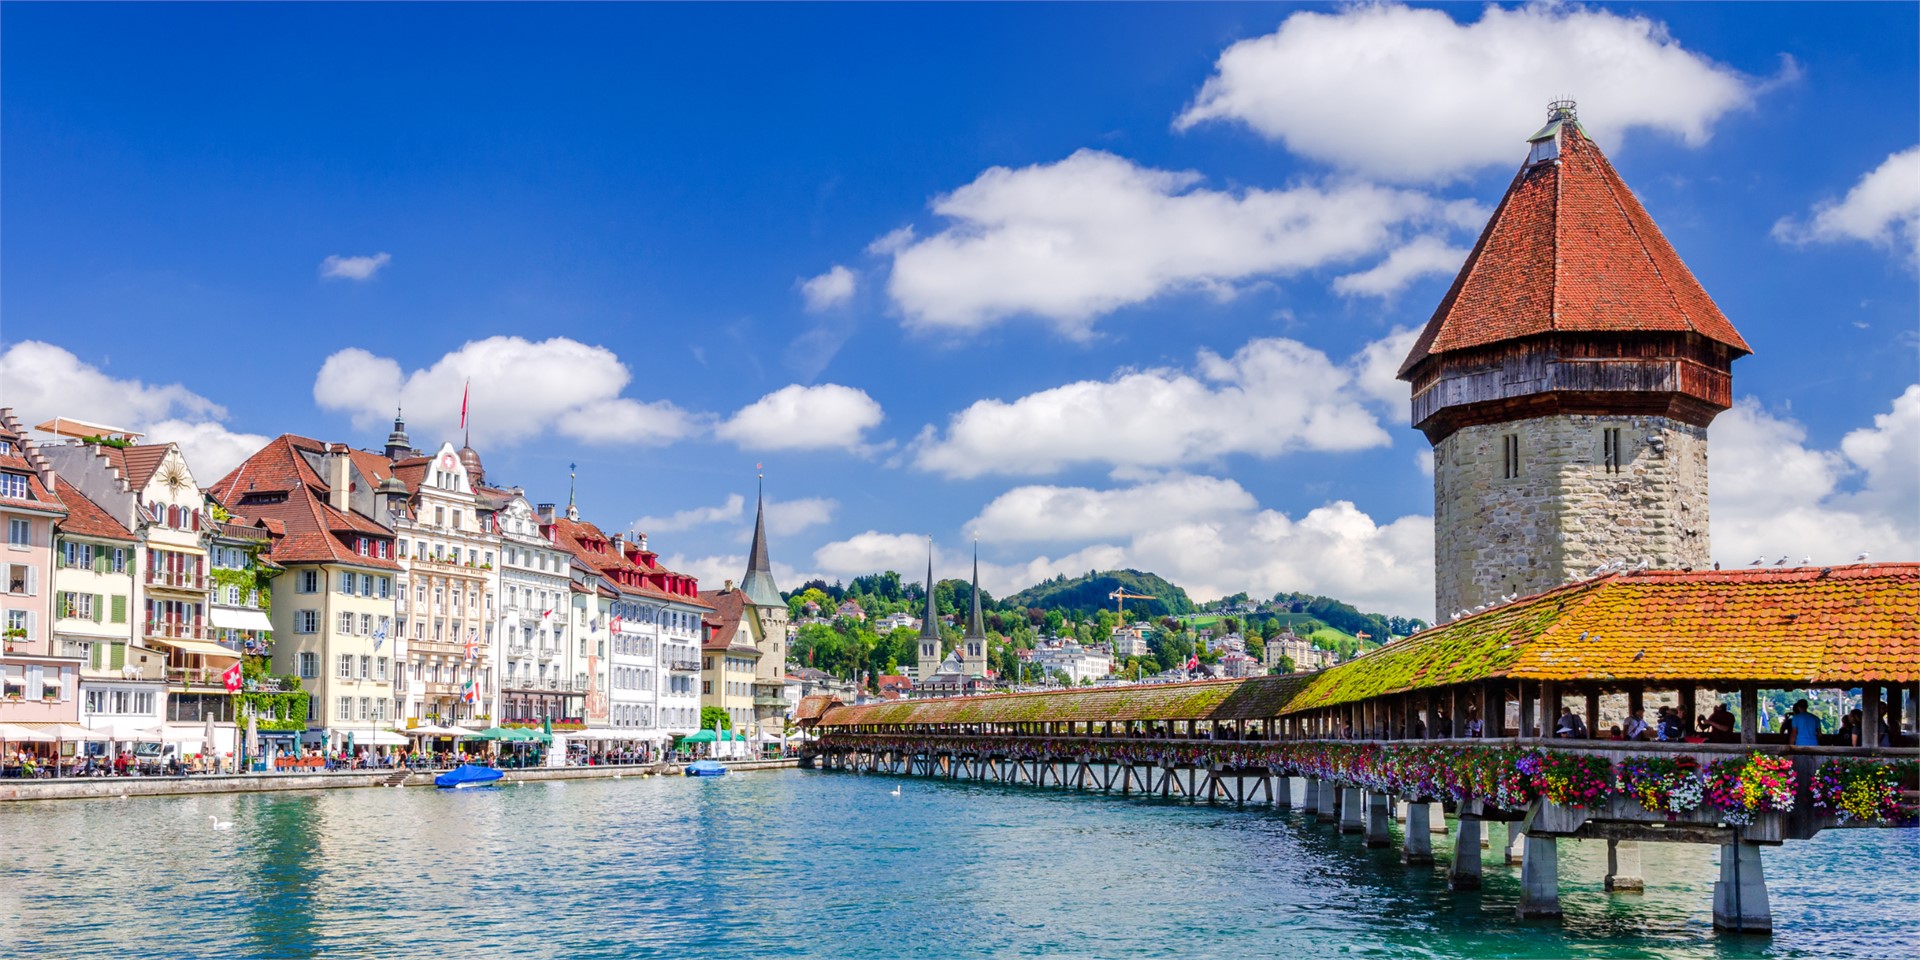 Hotels and accommodation in Lucerne, Switzerland
